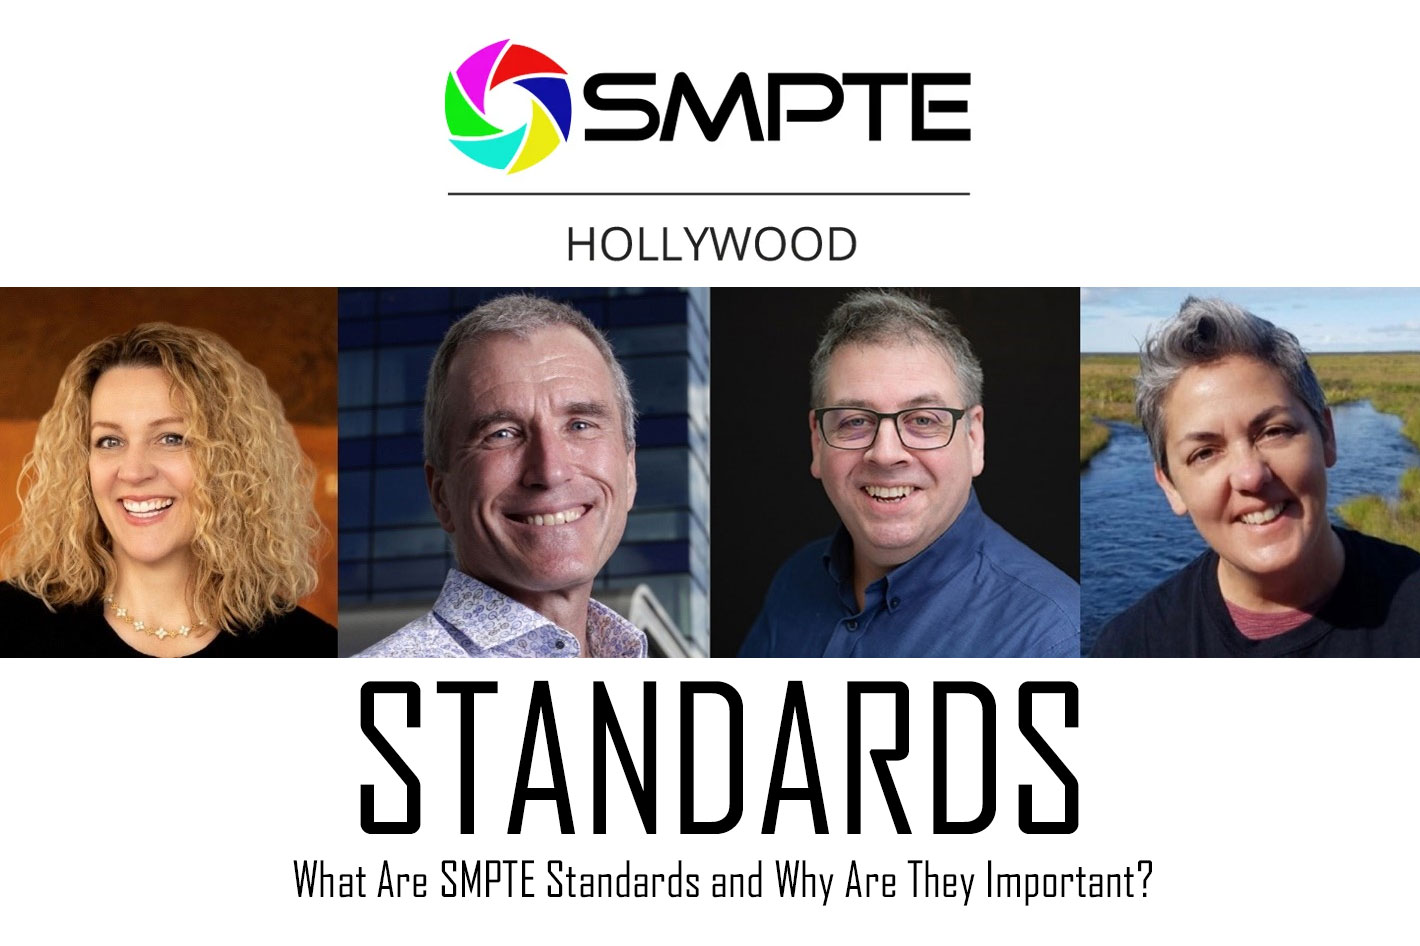 What are SMPTE standards and why are they important?